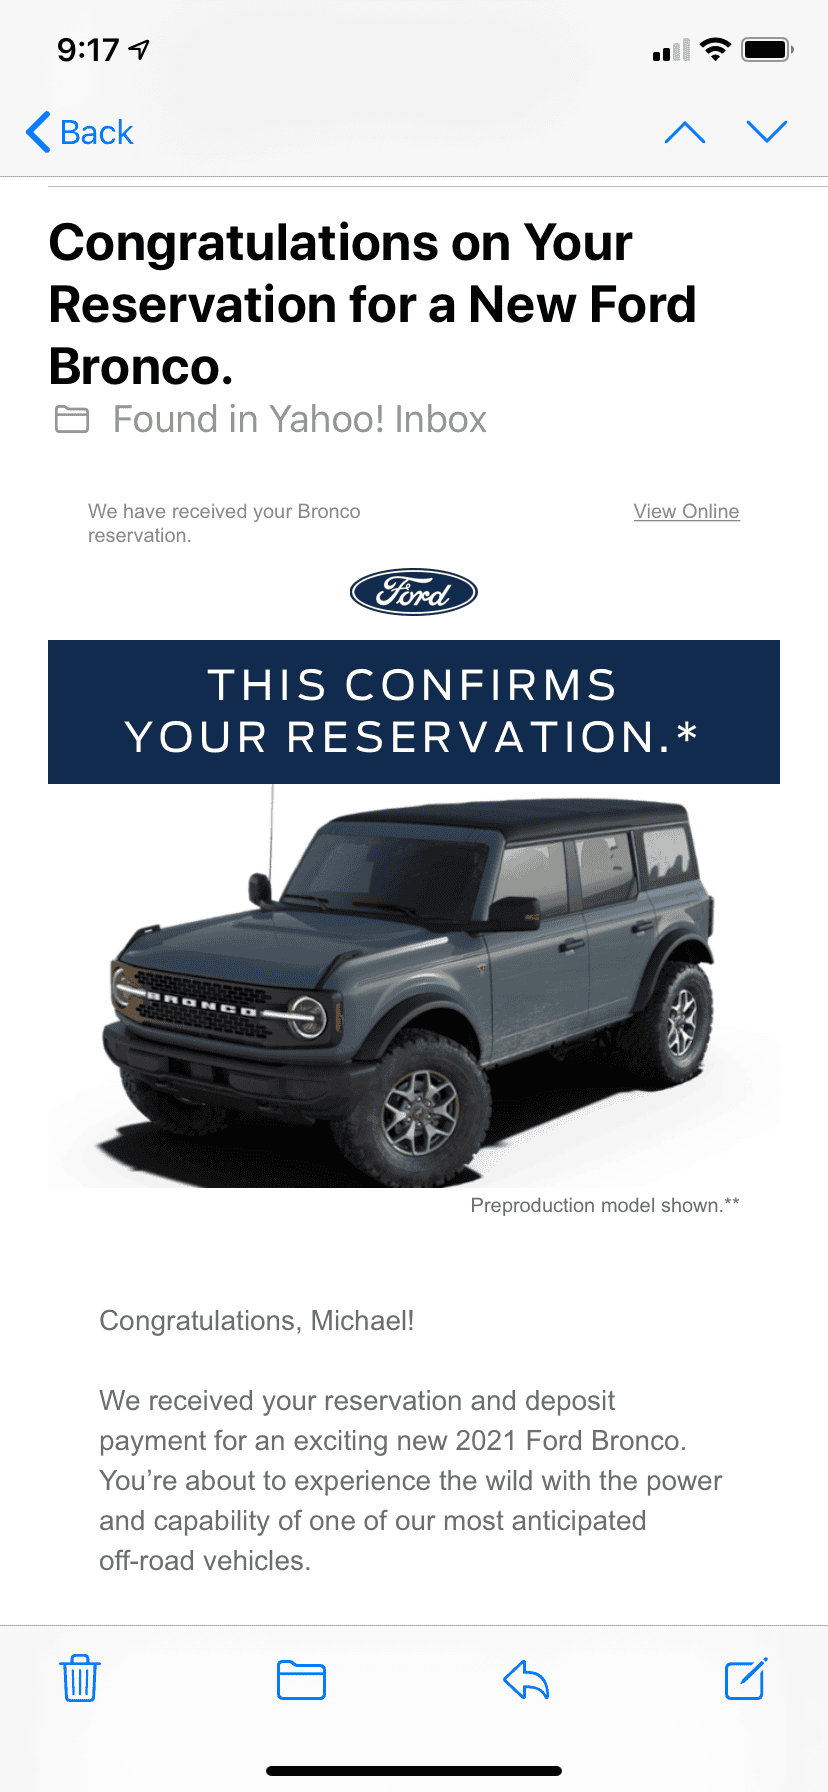 Ford Bronco What is the color of the Bronco sent in the reservation email? 1598883526084